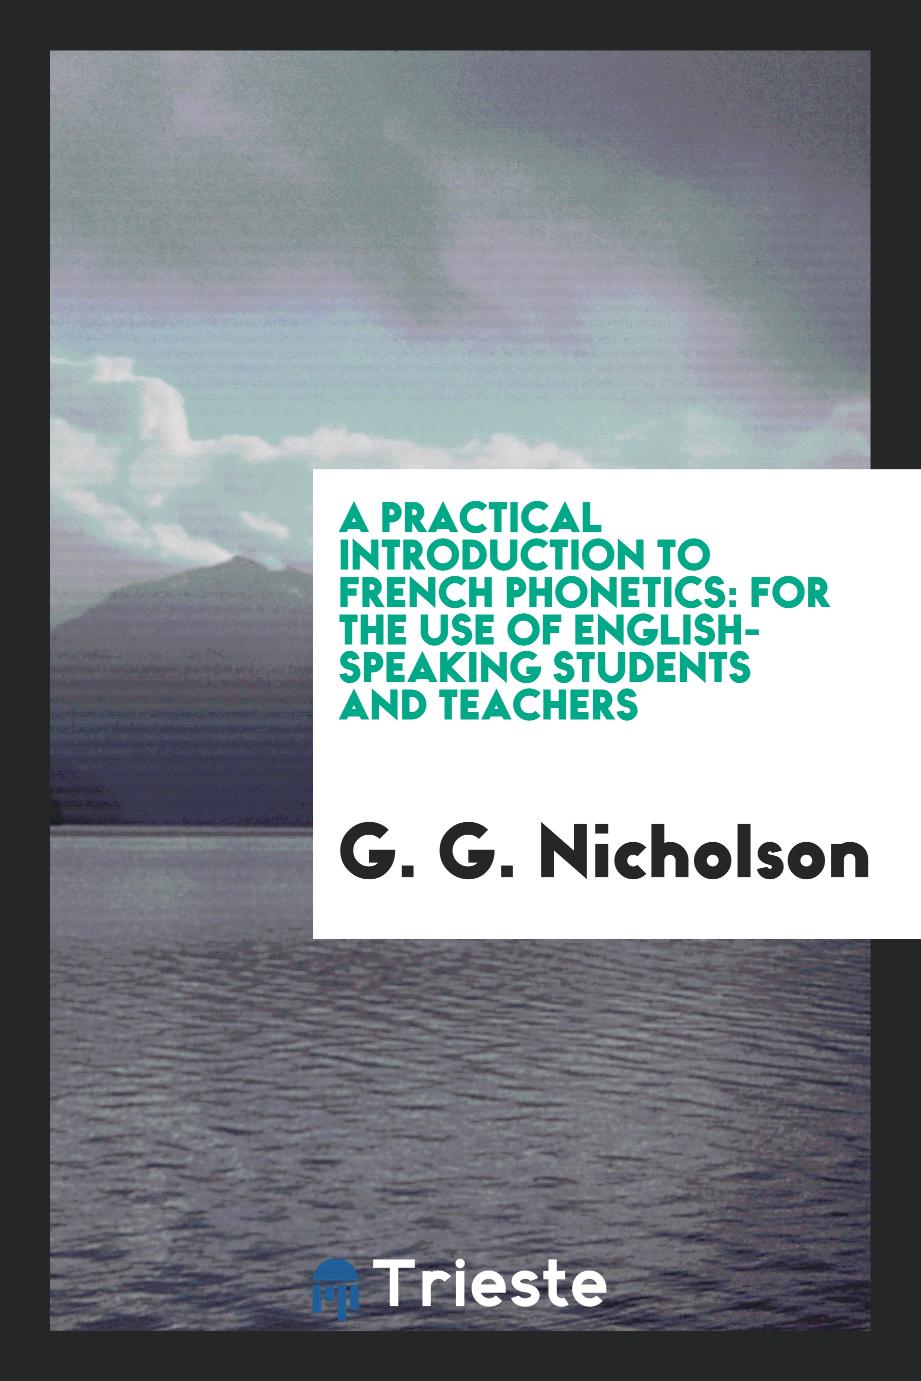 A practical introduction to French phonetics: for the use of English-speaking students and teachers